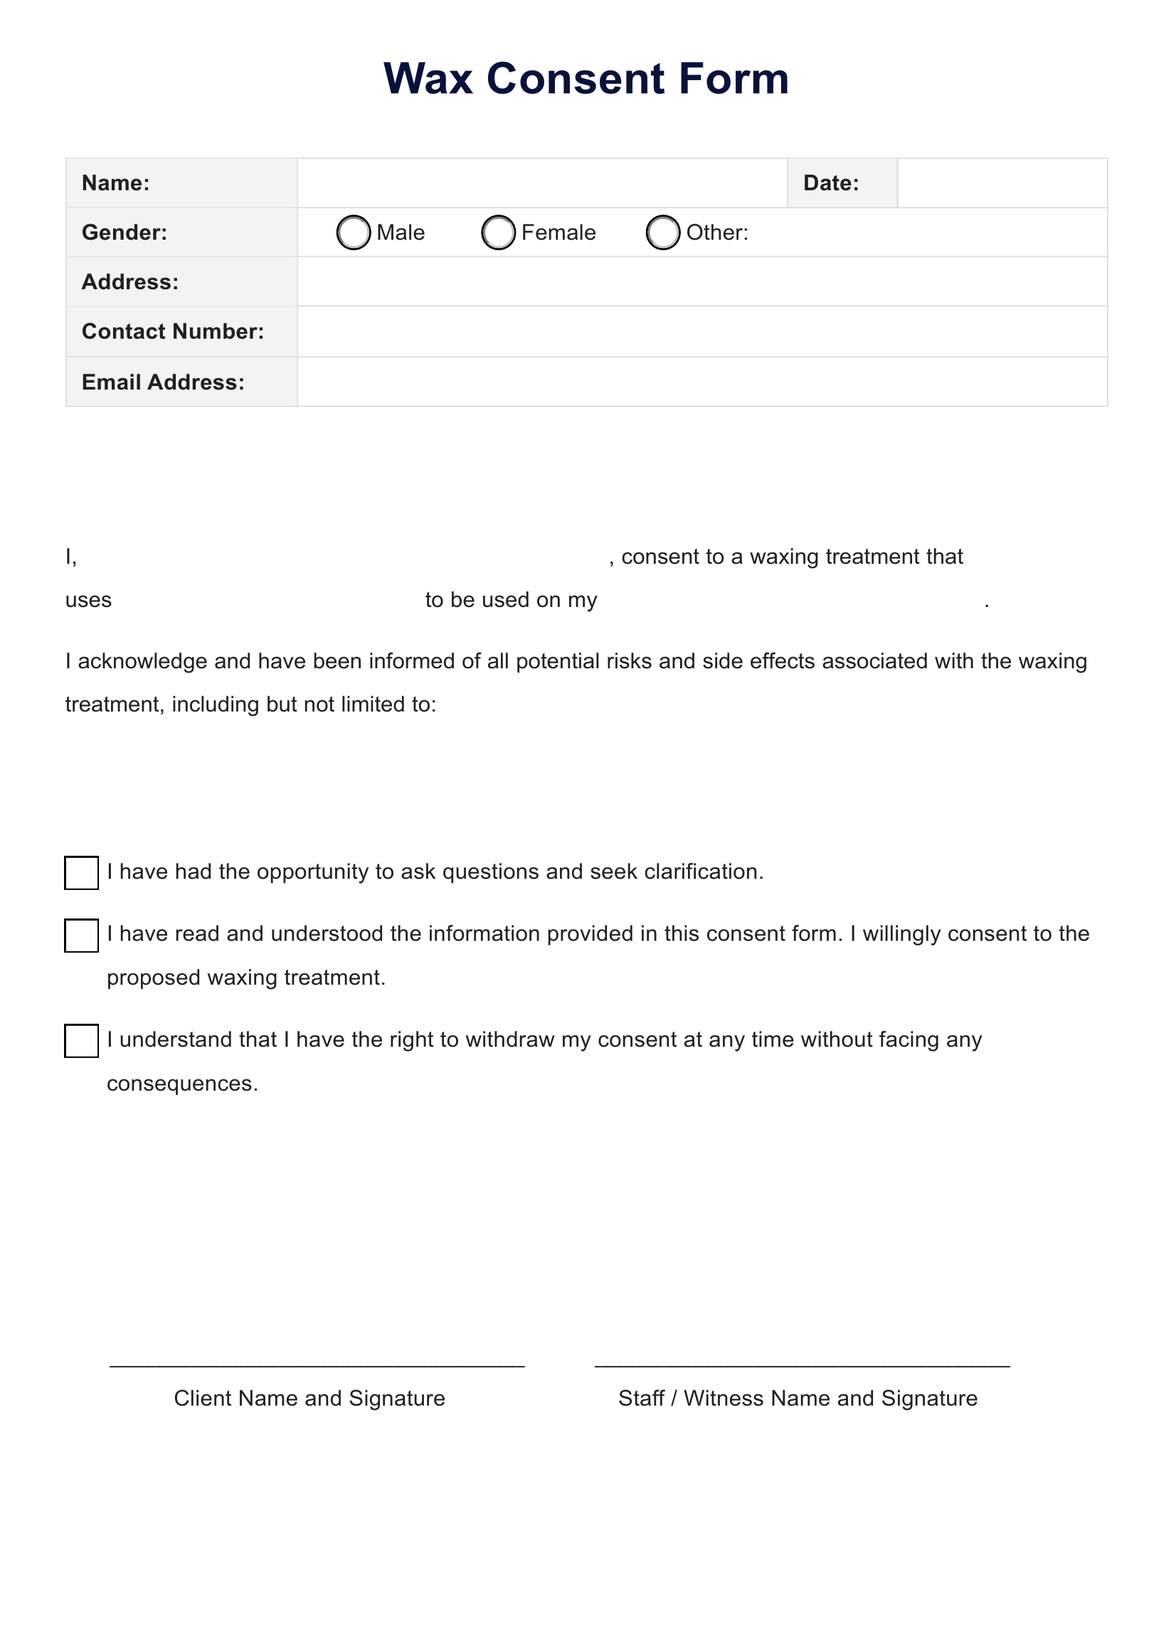 Wax Consent Form PDF Example